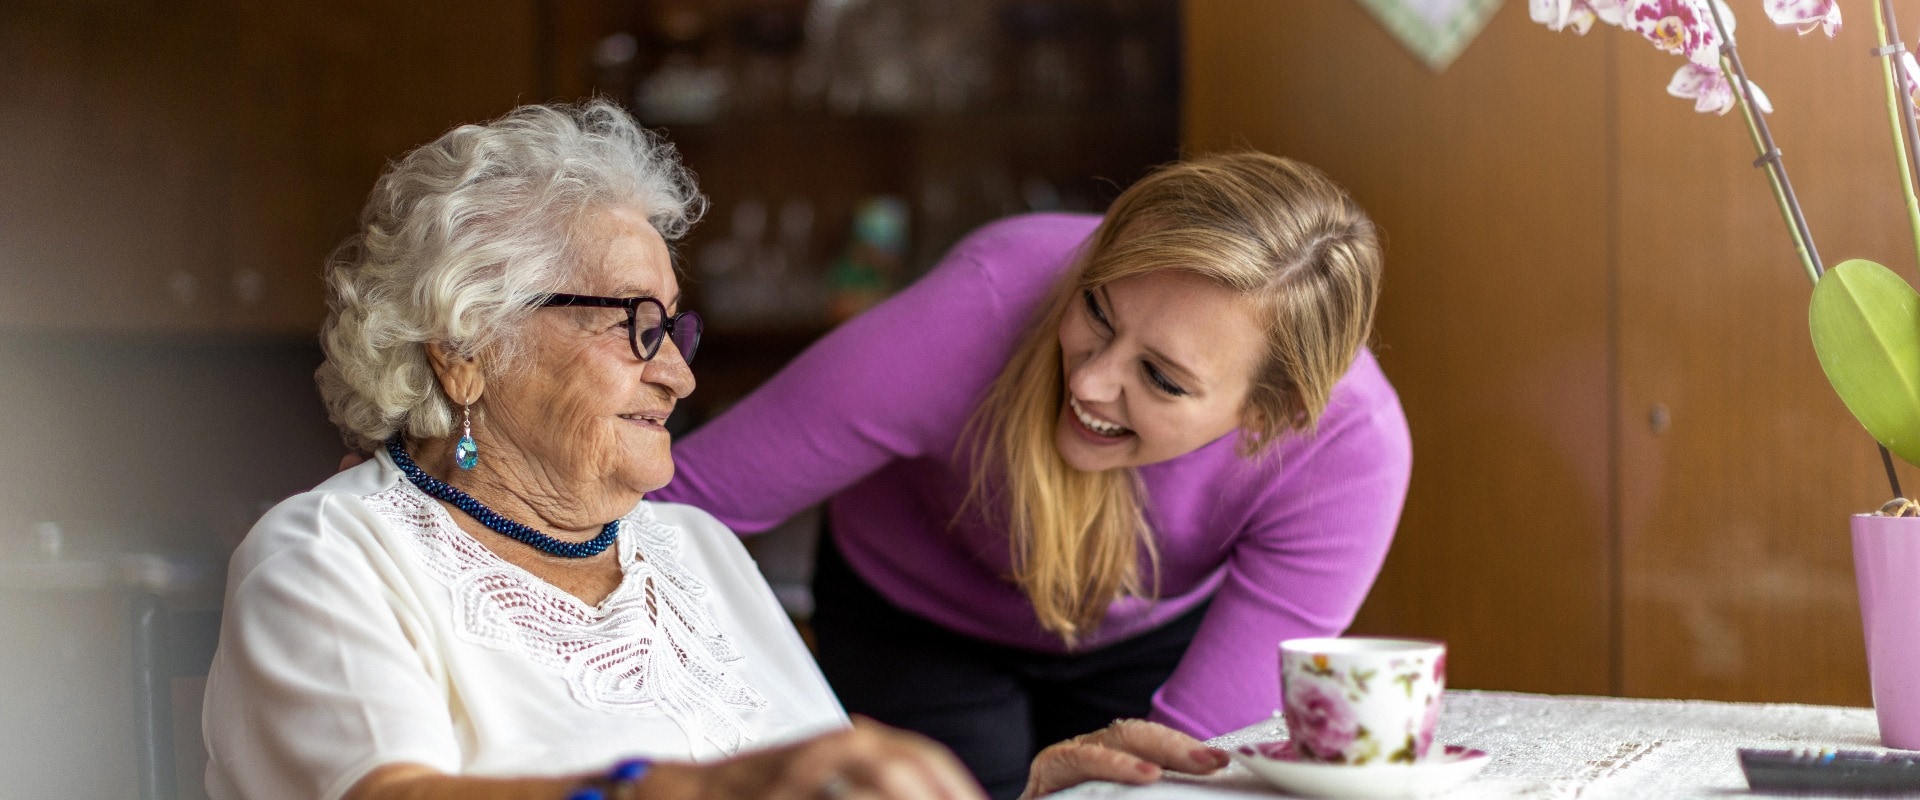 Young woman spending time with her elderly grandmother at home